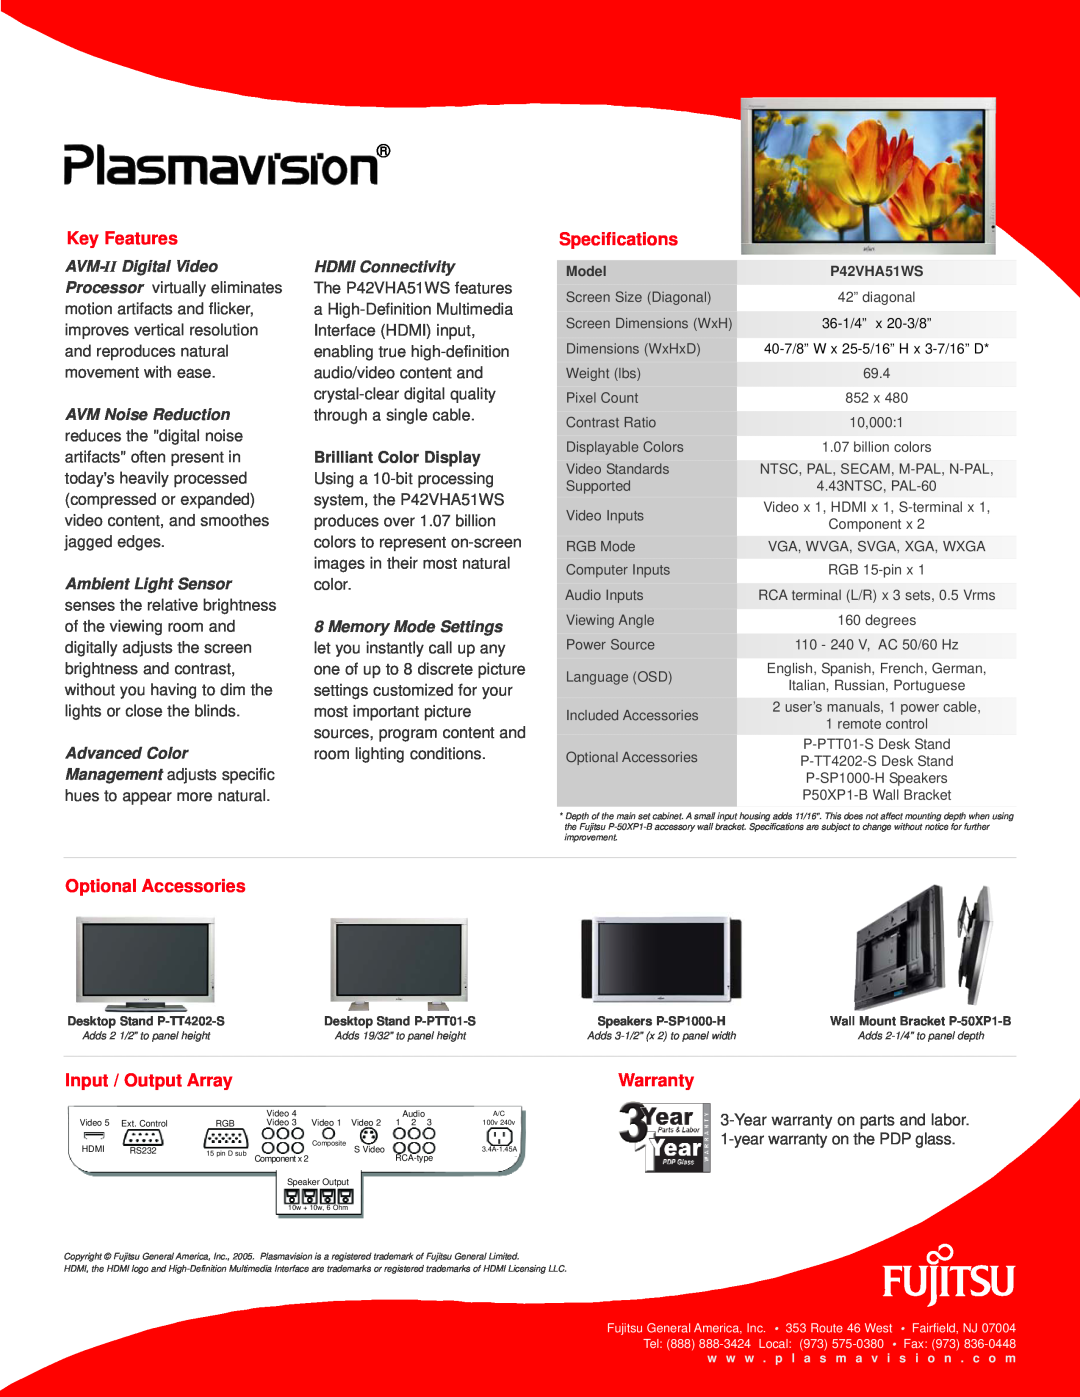 Fujitsu P42VHA51WS manual Key Features, Specifications, Optional Accessories, Input / Output Array, Warranty 